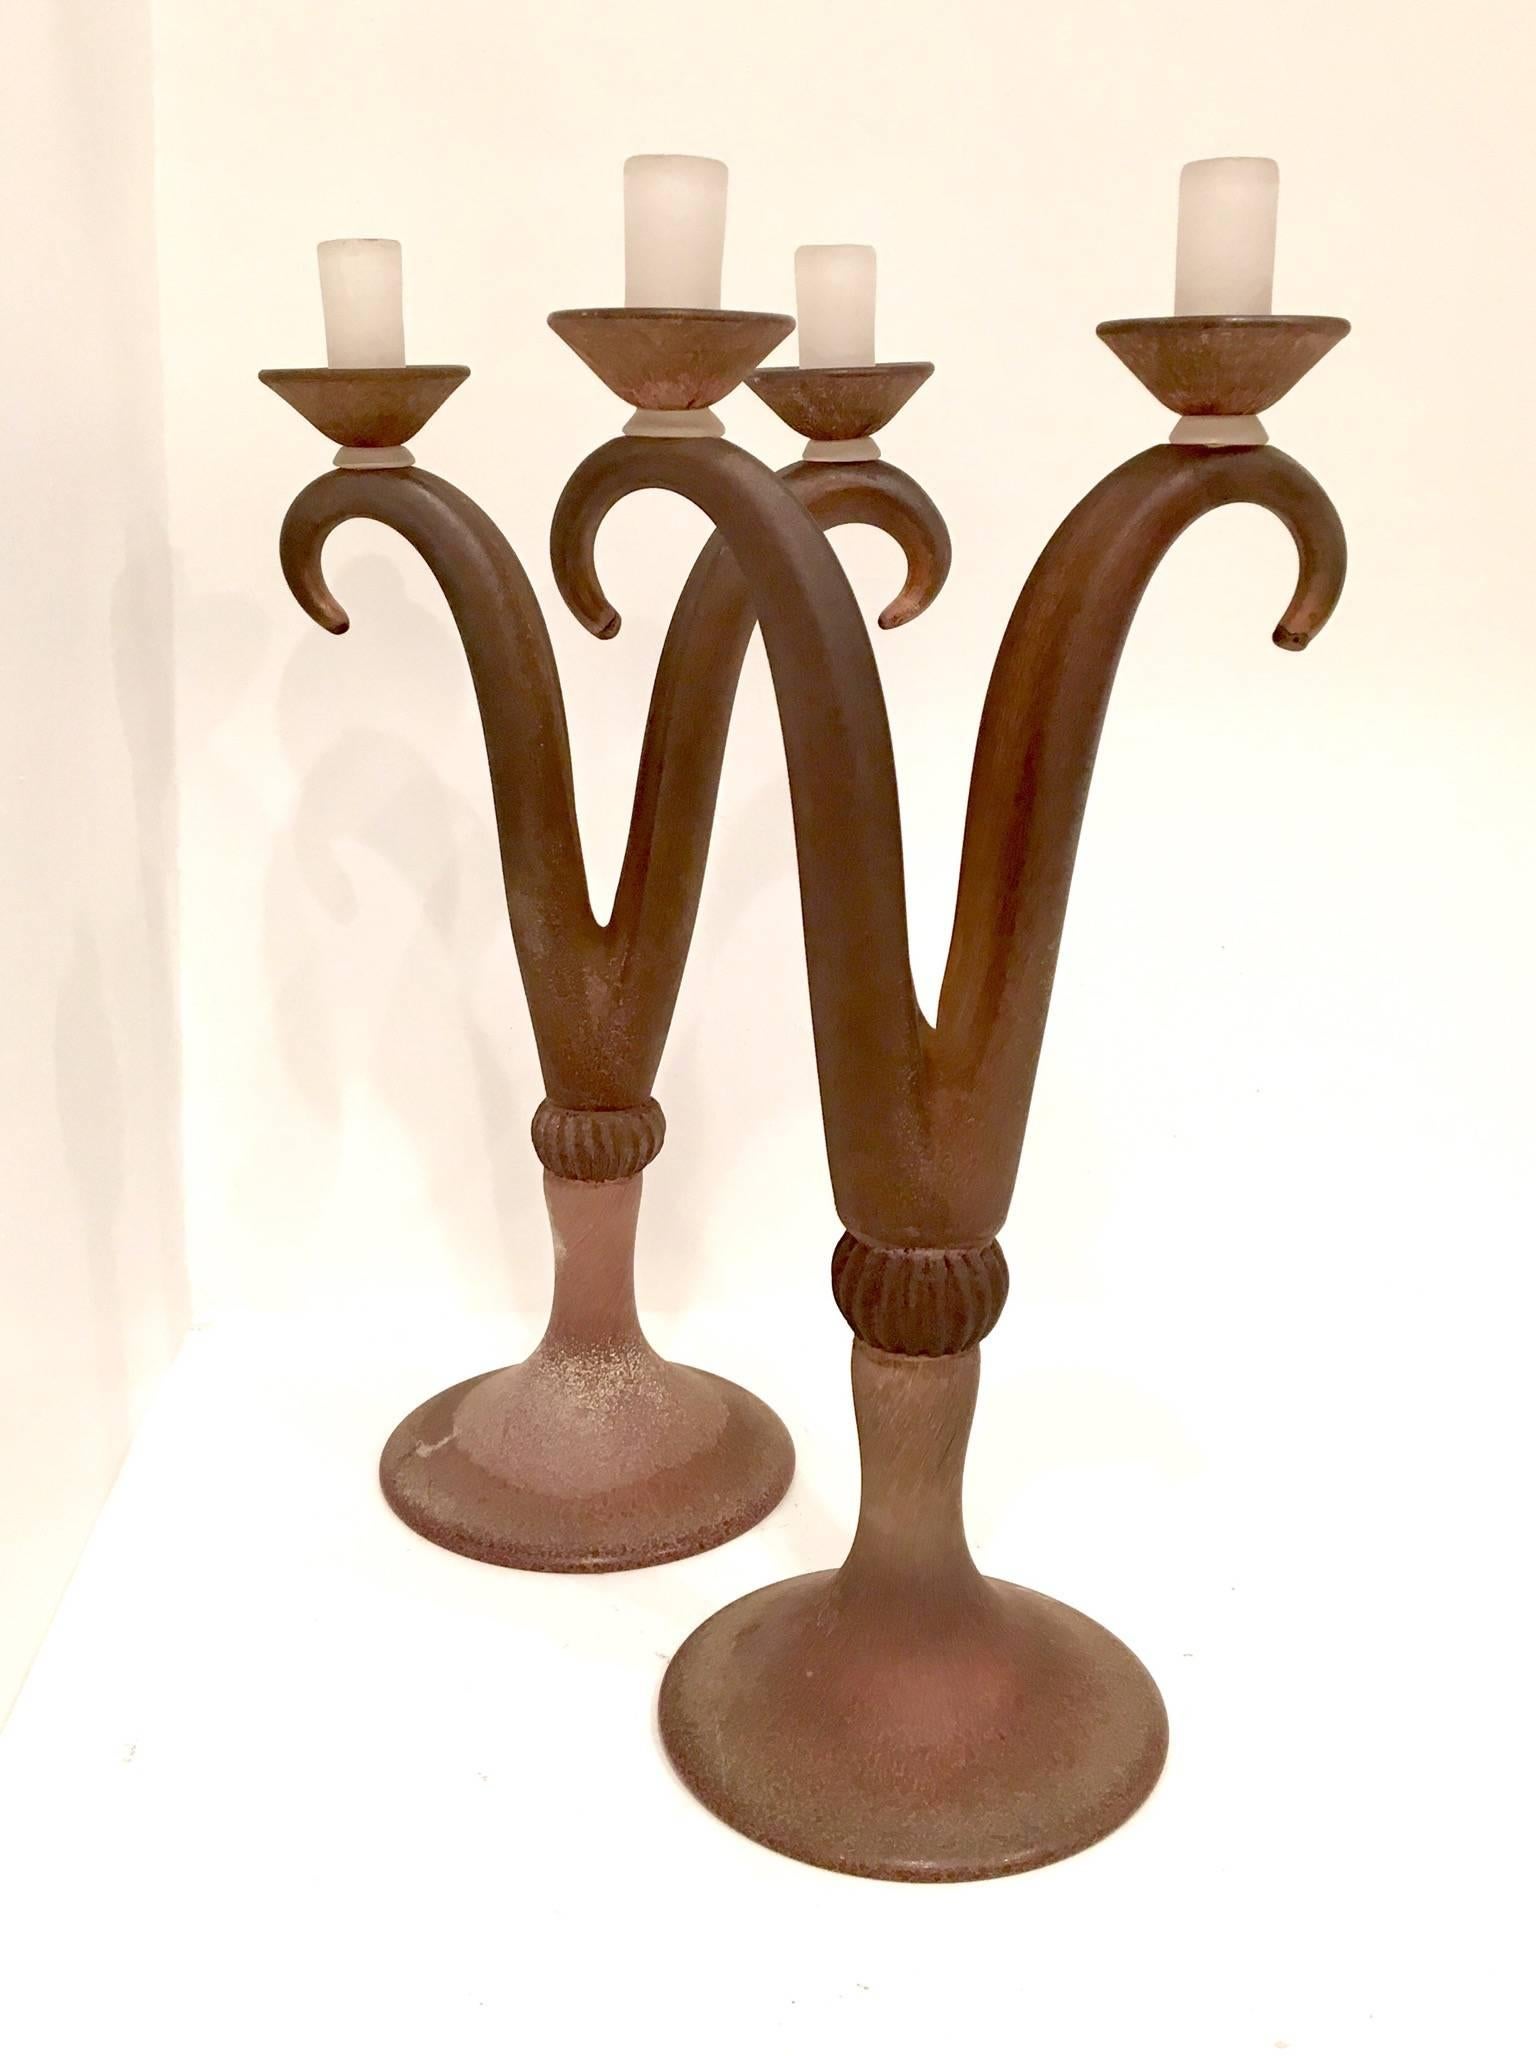 Elegant tall unique pair of candelabras by Cenedese Scavo glass, circa 1970s, in purple and clear glass combo. One its a bit taller than the other normal due to mouth blown glass, but no chips or cracks.